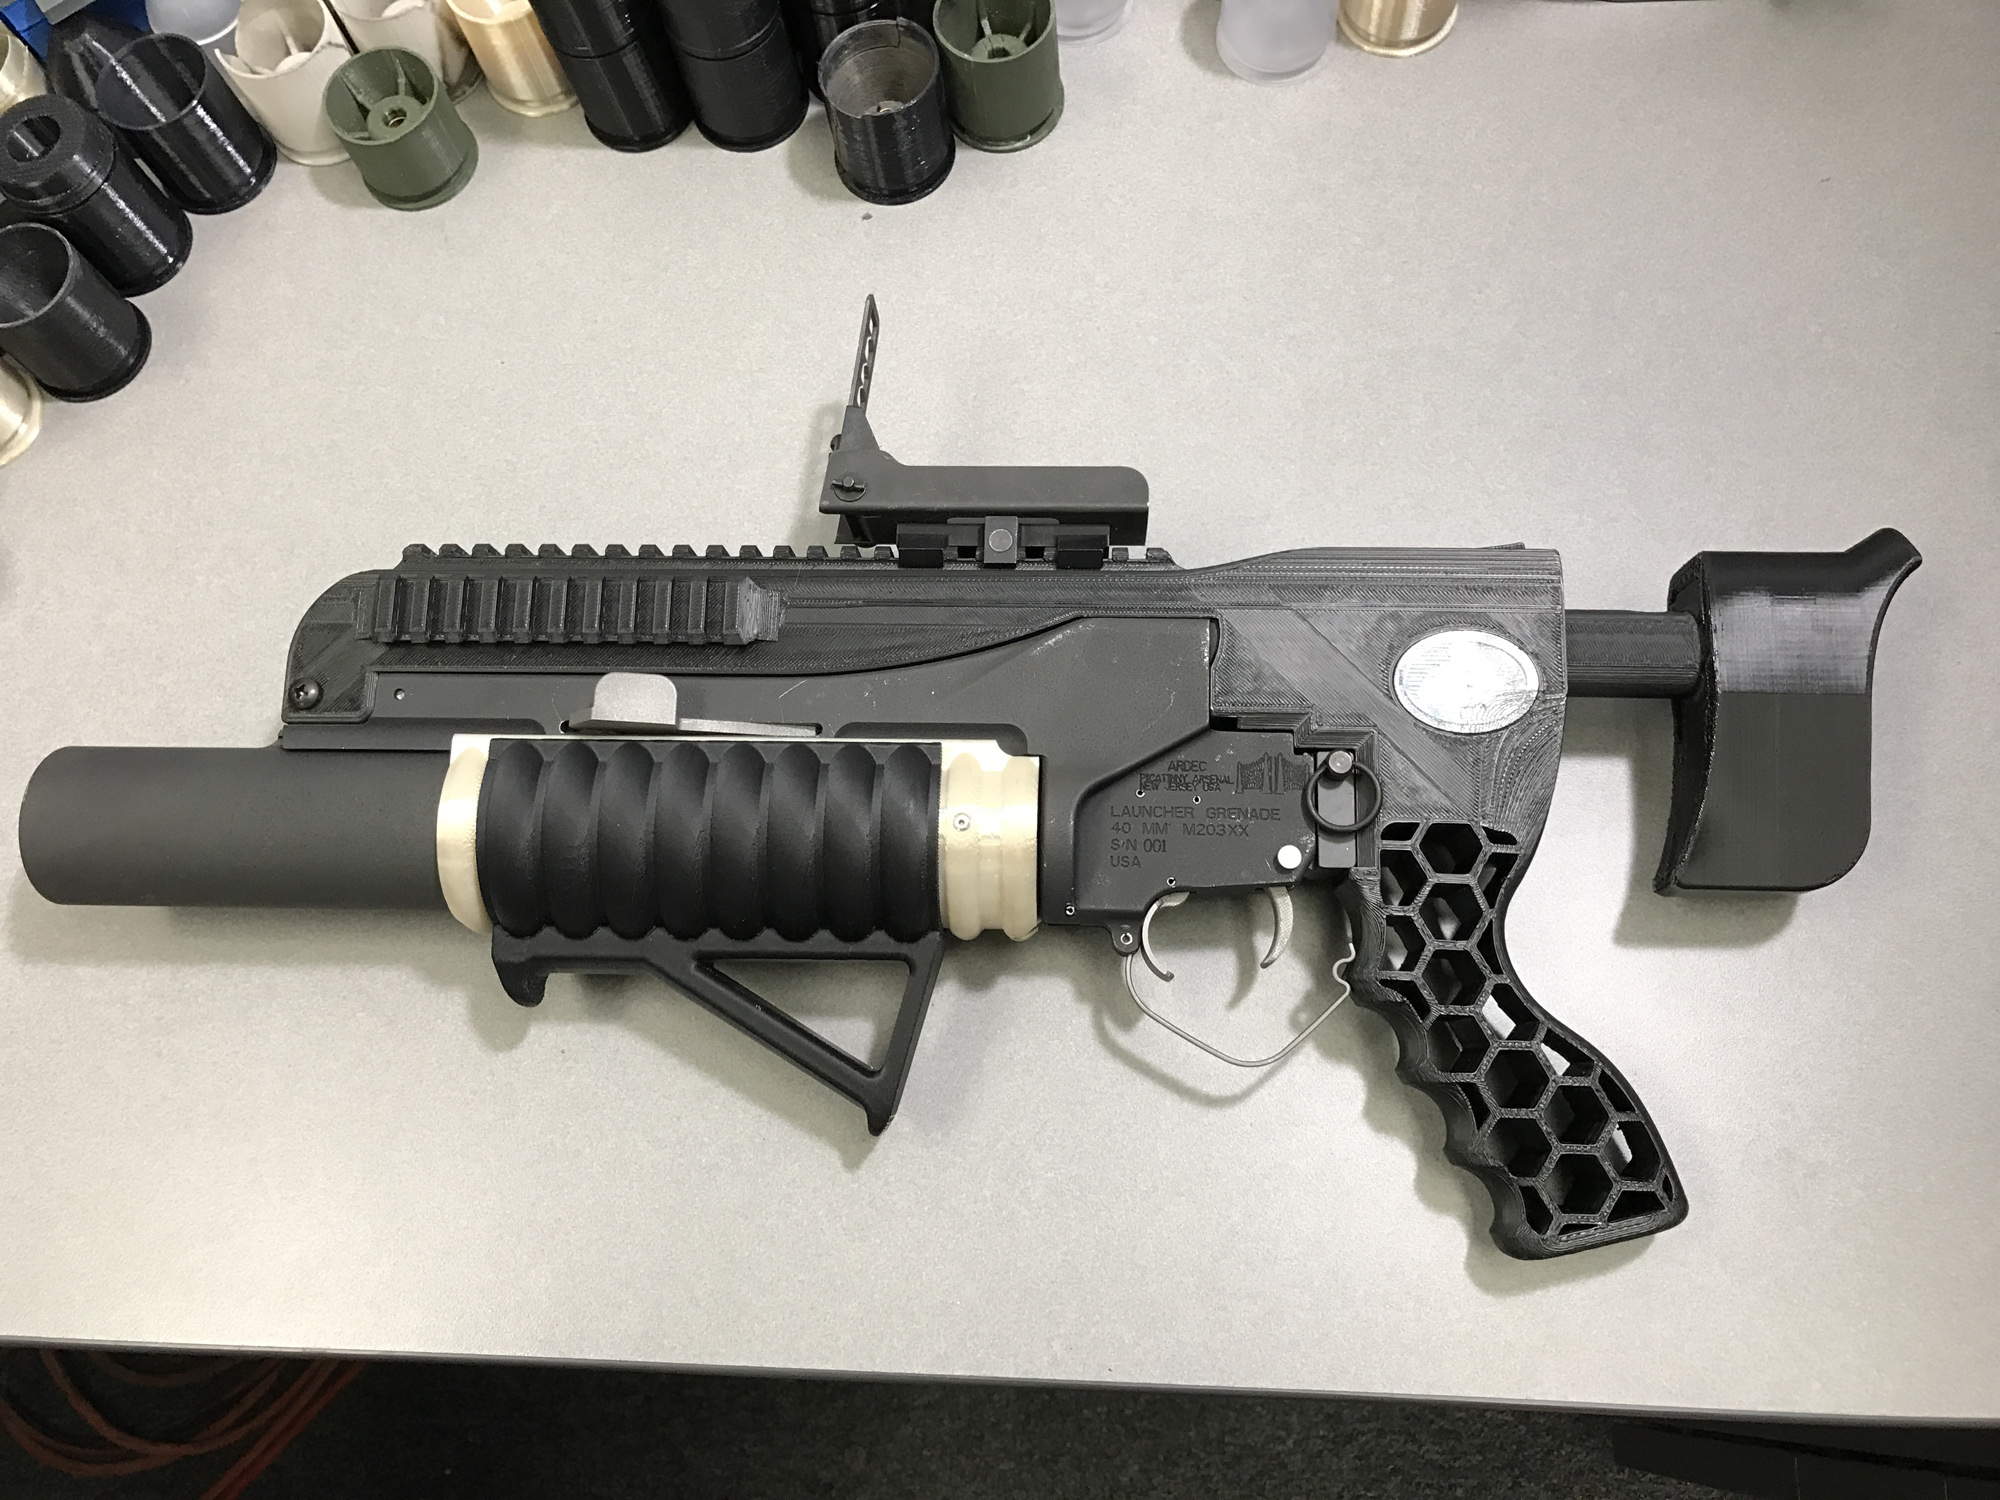 Image: Lying mainstream media claims 3D printed gun PROPS are “3D-printed guns” even though they don’t function